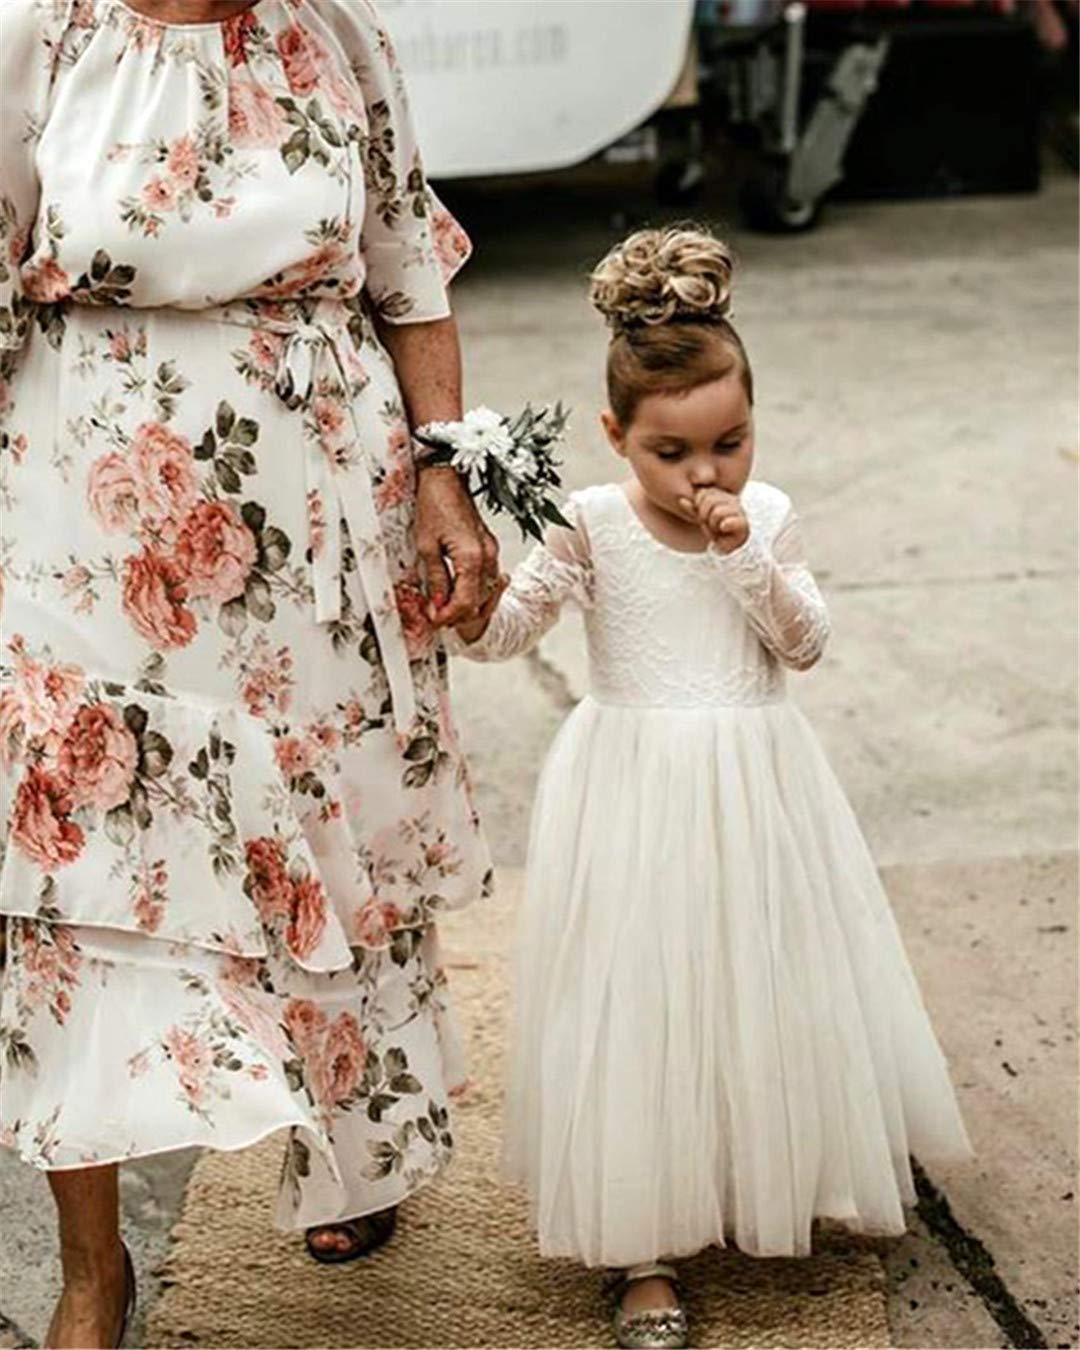 2Bunnies Flower Girl Dress Rose Lace Back A-Line Long Sleeve Straight Tulle Maxi (White) - 2BUNNIES